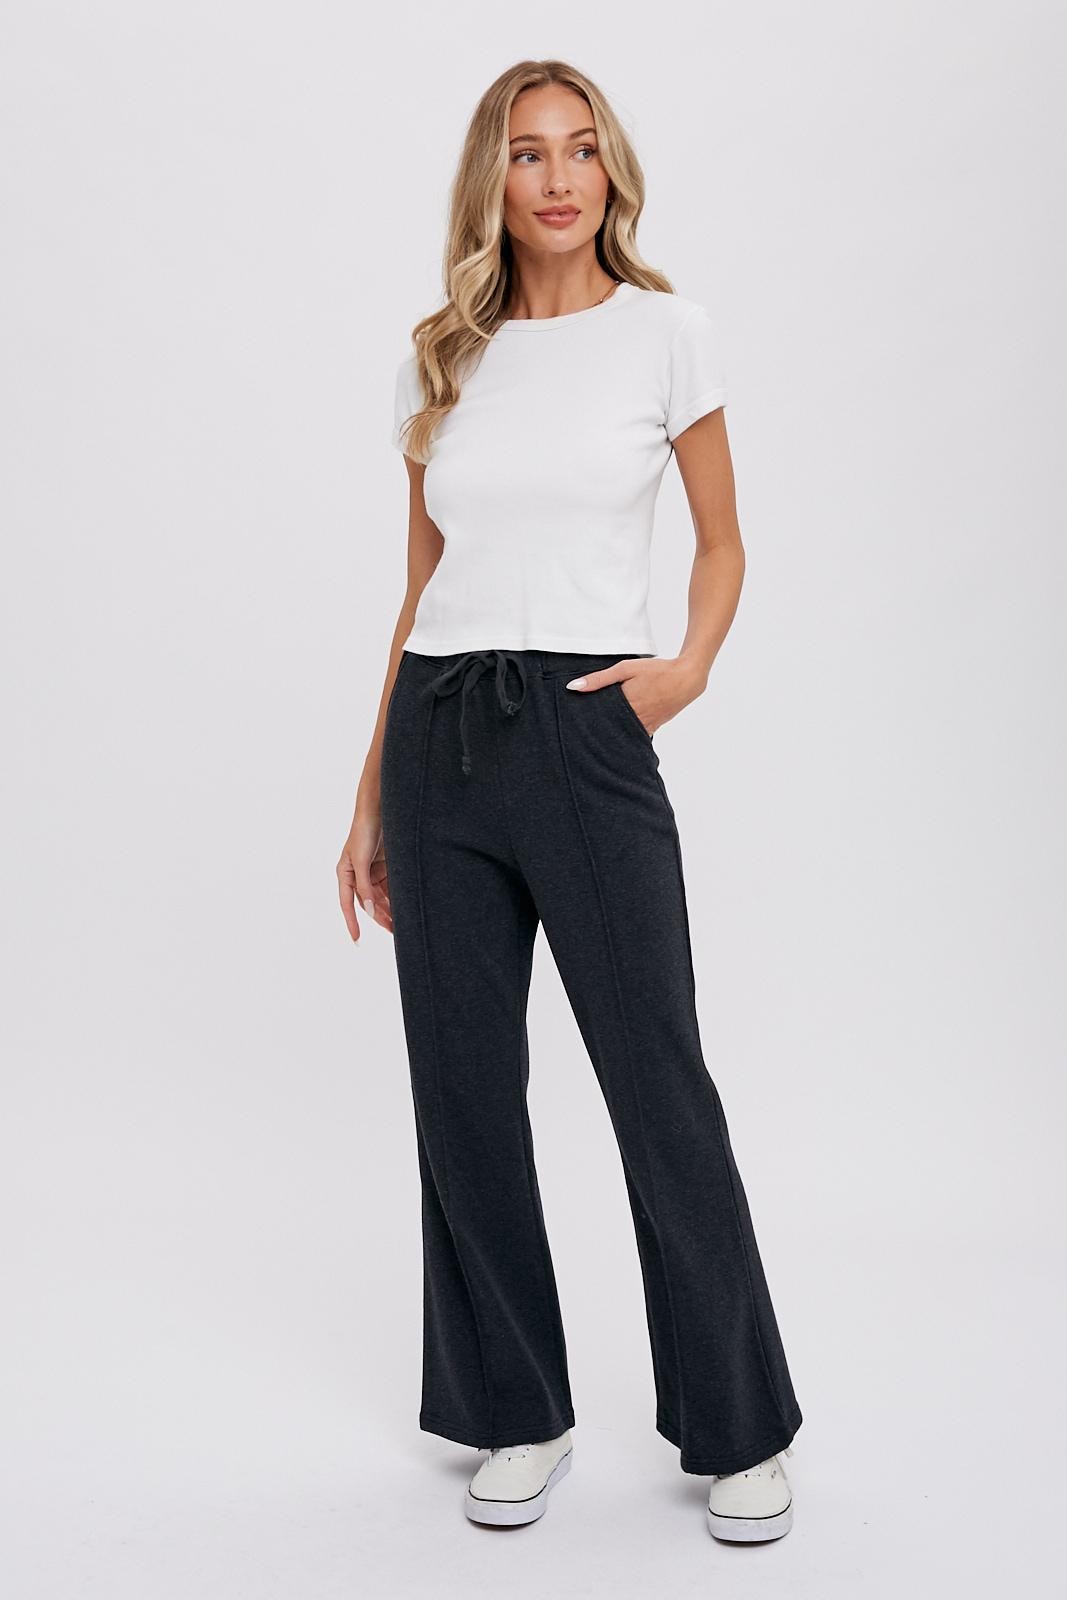 Charcoal Faux Fur Lined Flare Lounge Pants